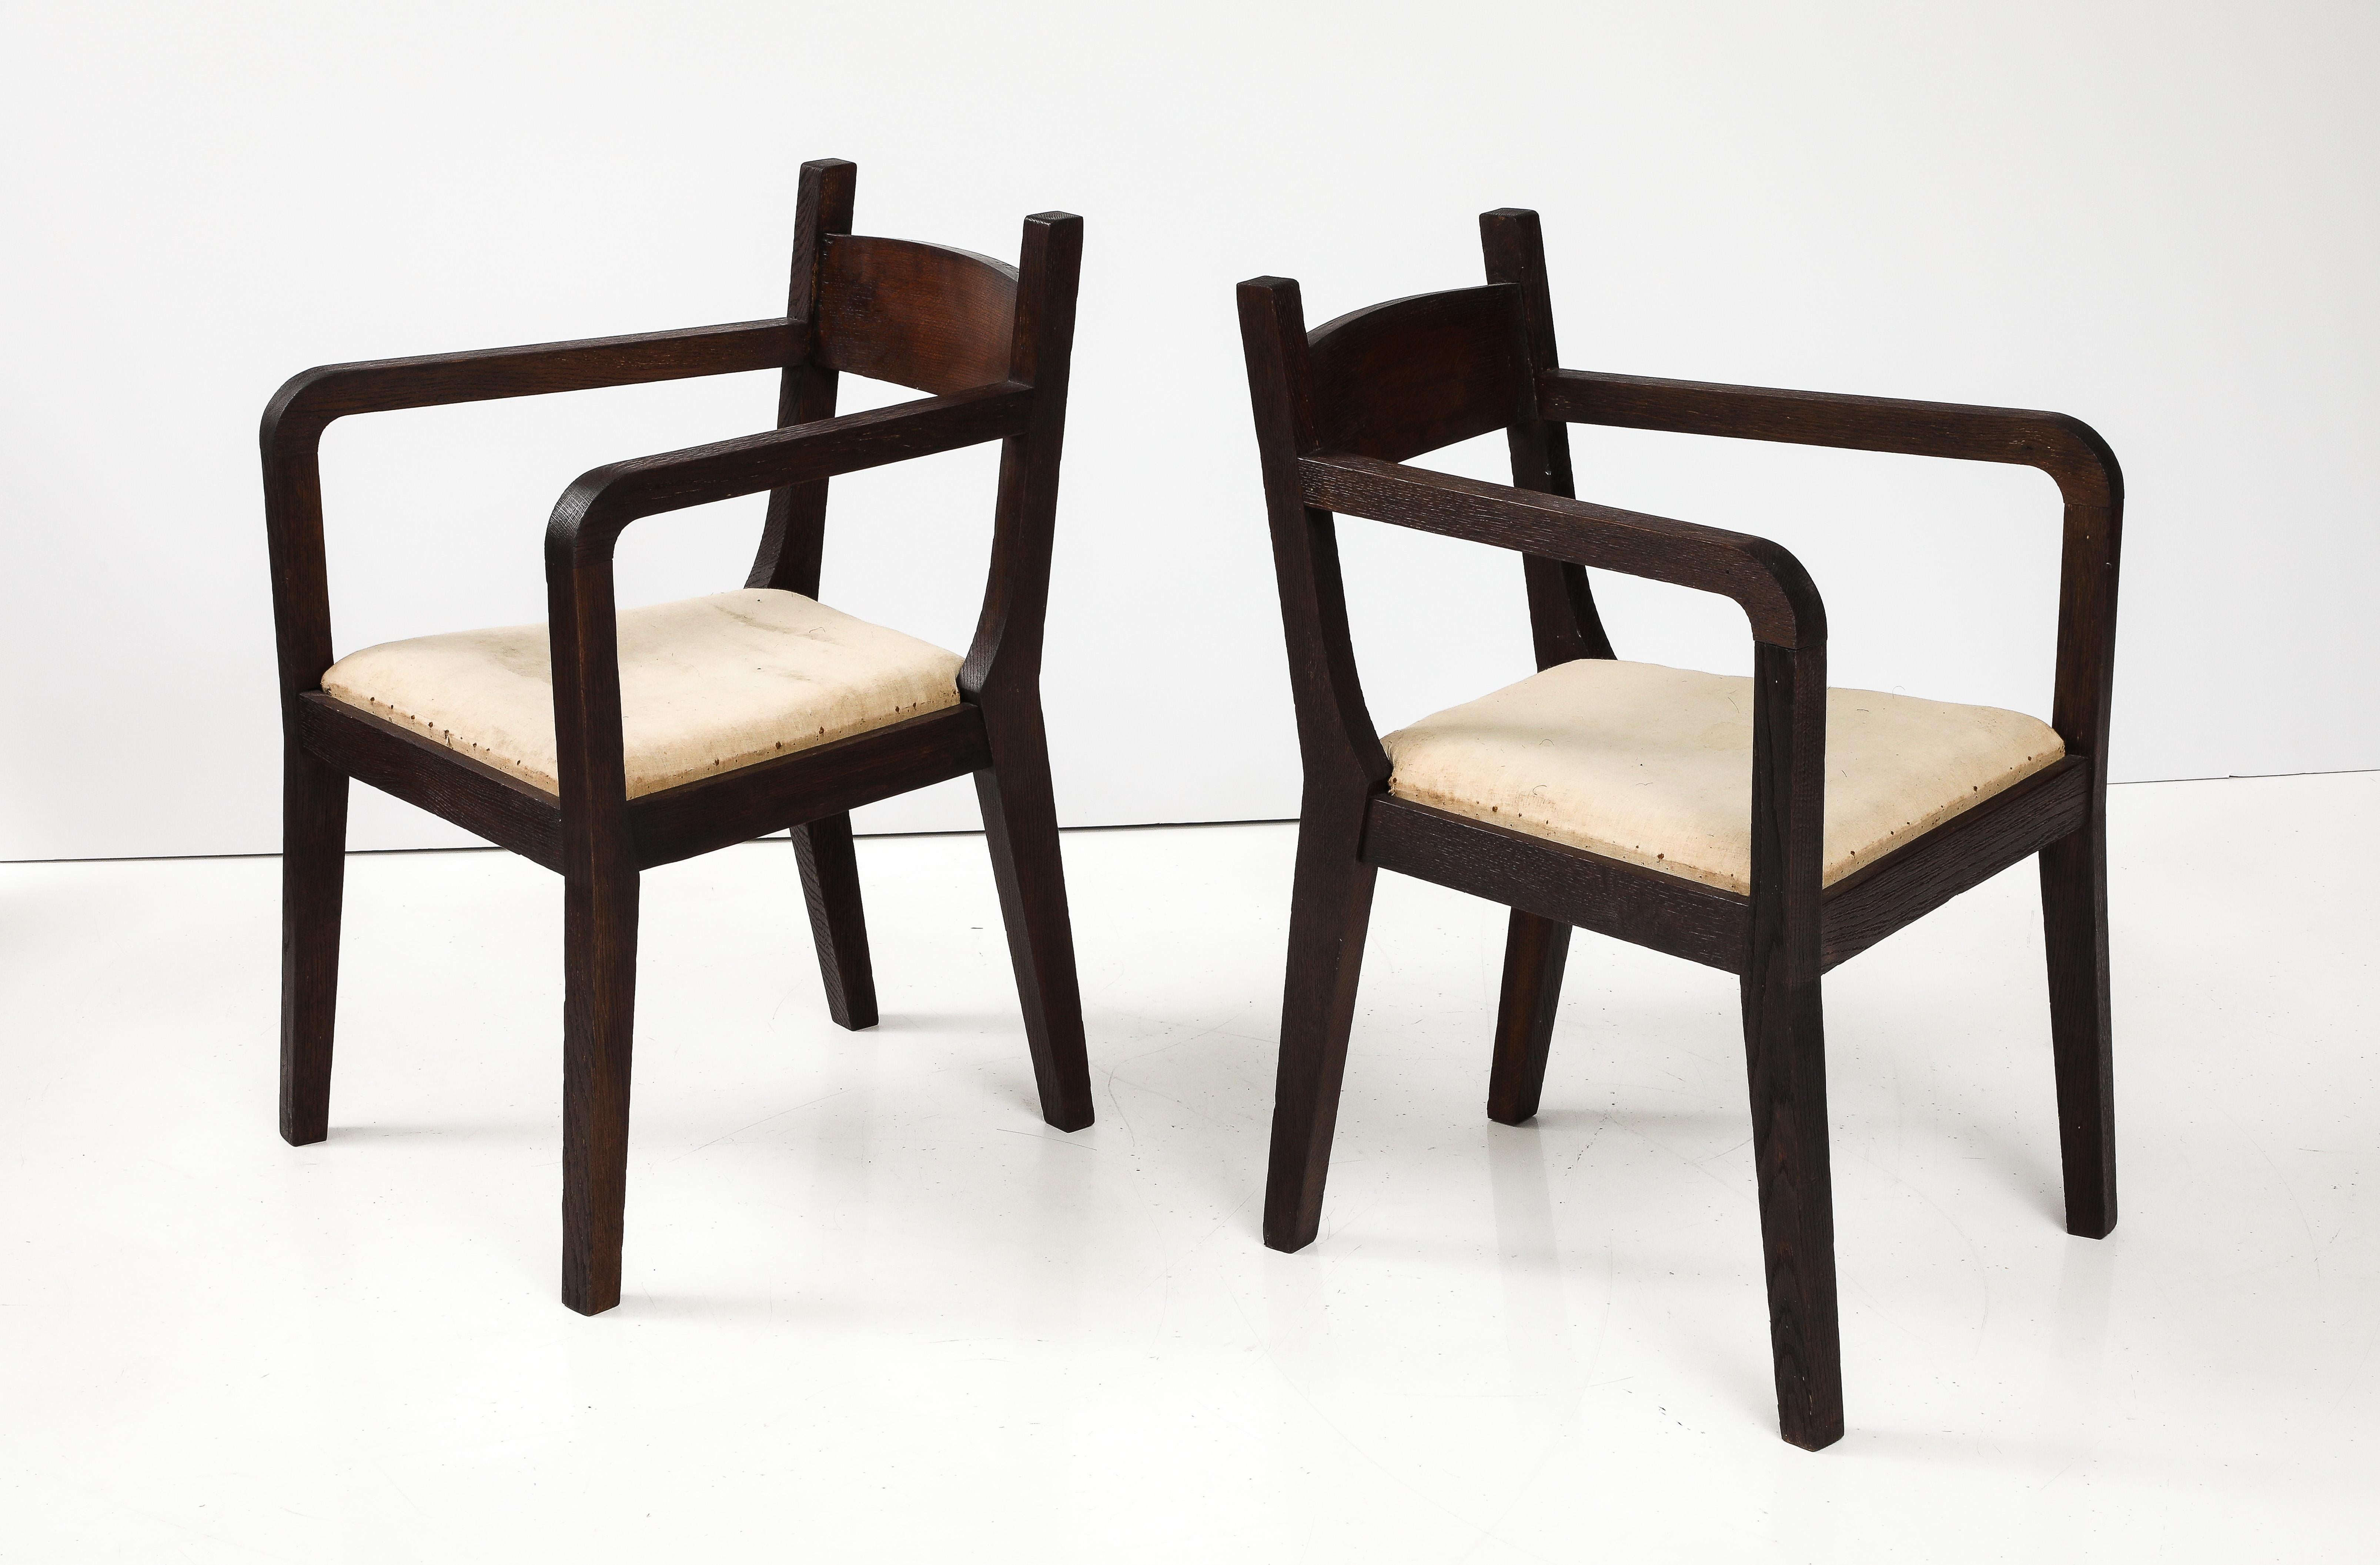 Pair of Modernist Eyre de Lanux Armchairs in Brushed Oak, France, c. 1925 For Sale 5